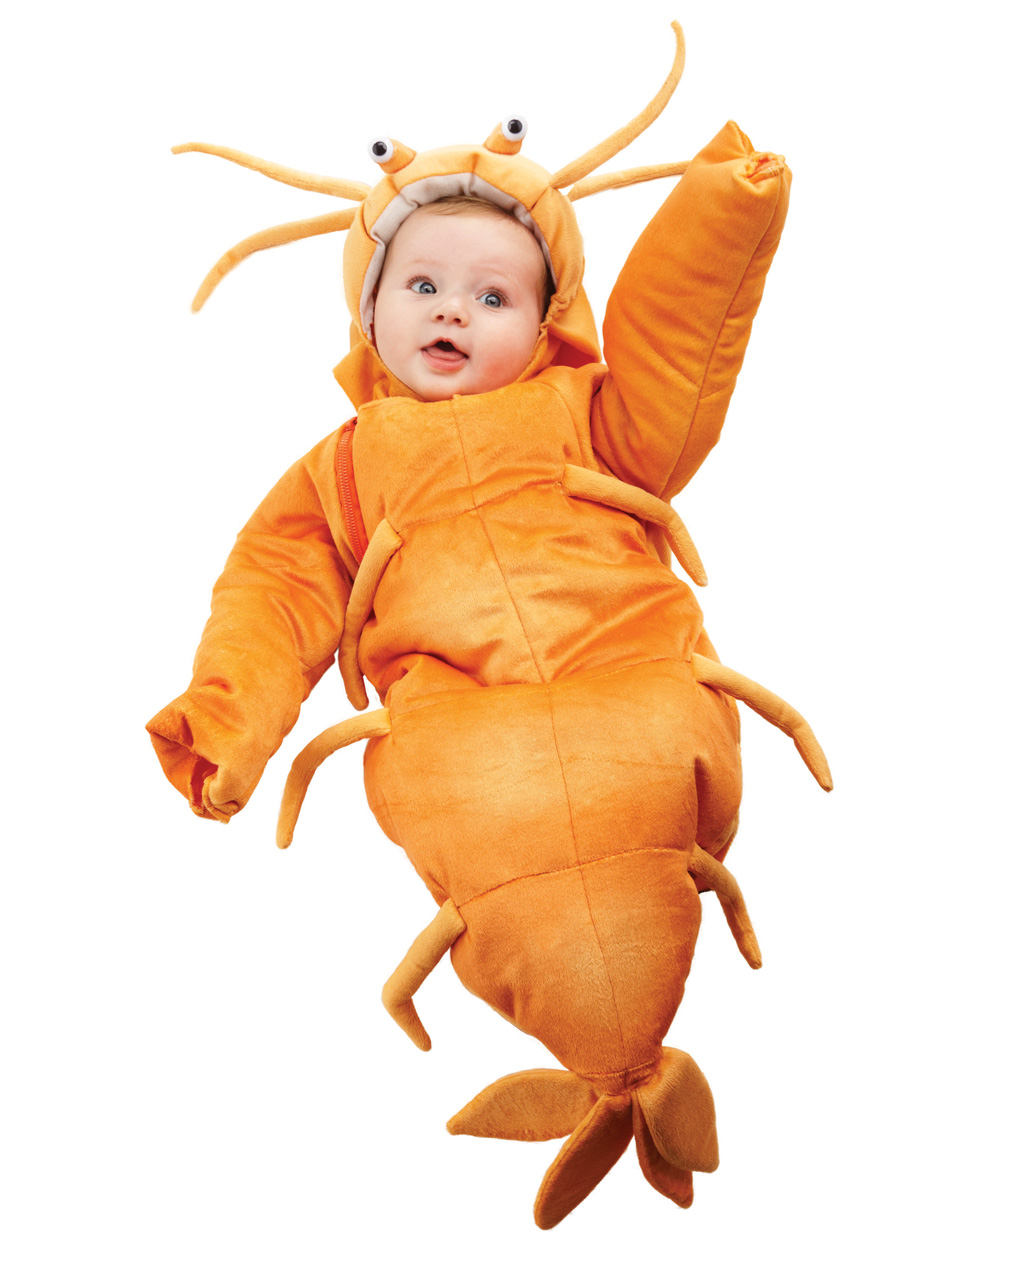 Shrimp Baby Bag buy as a baby suit